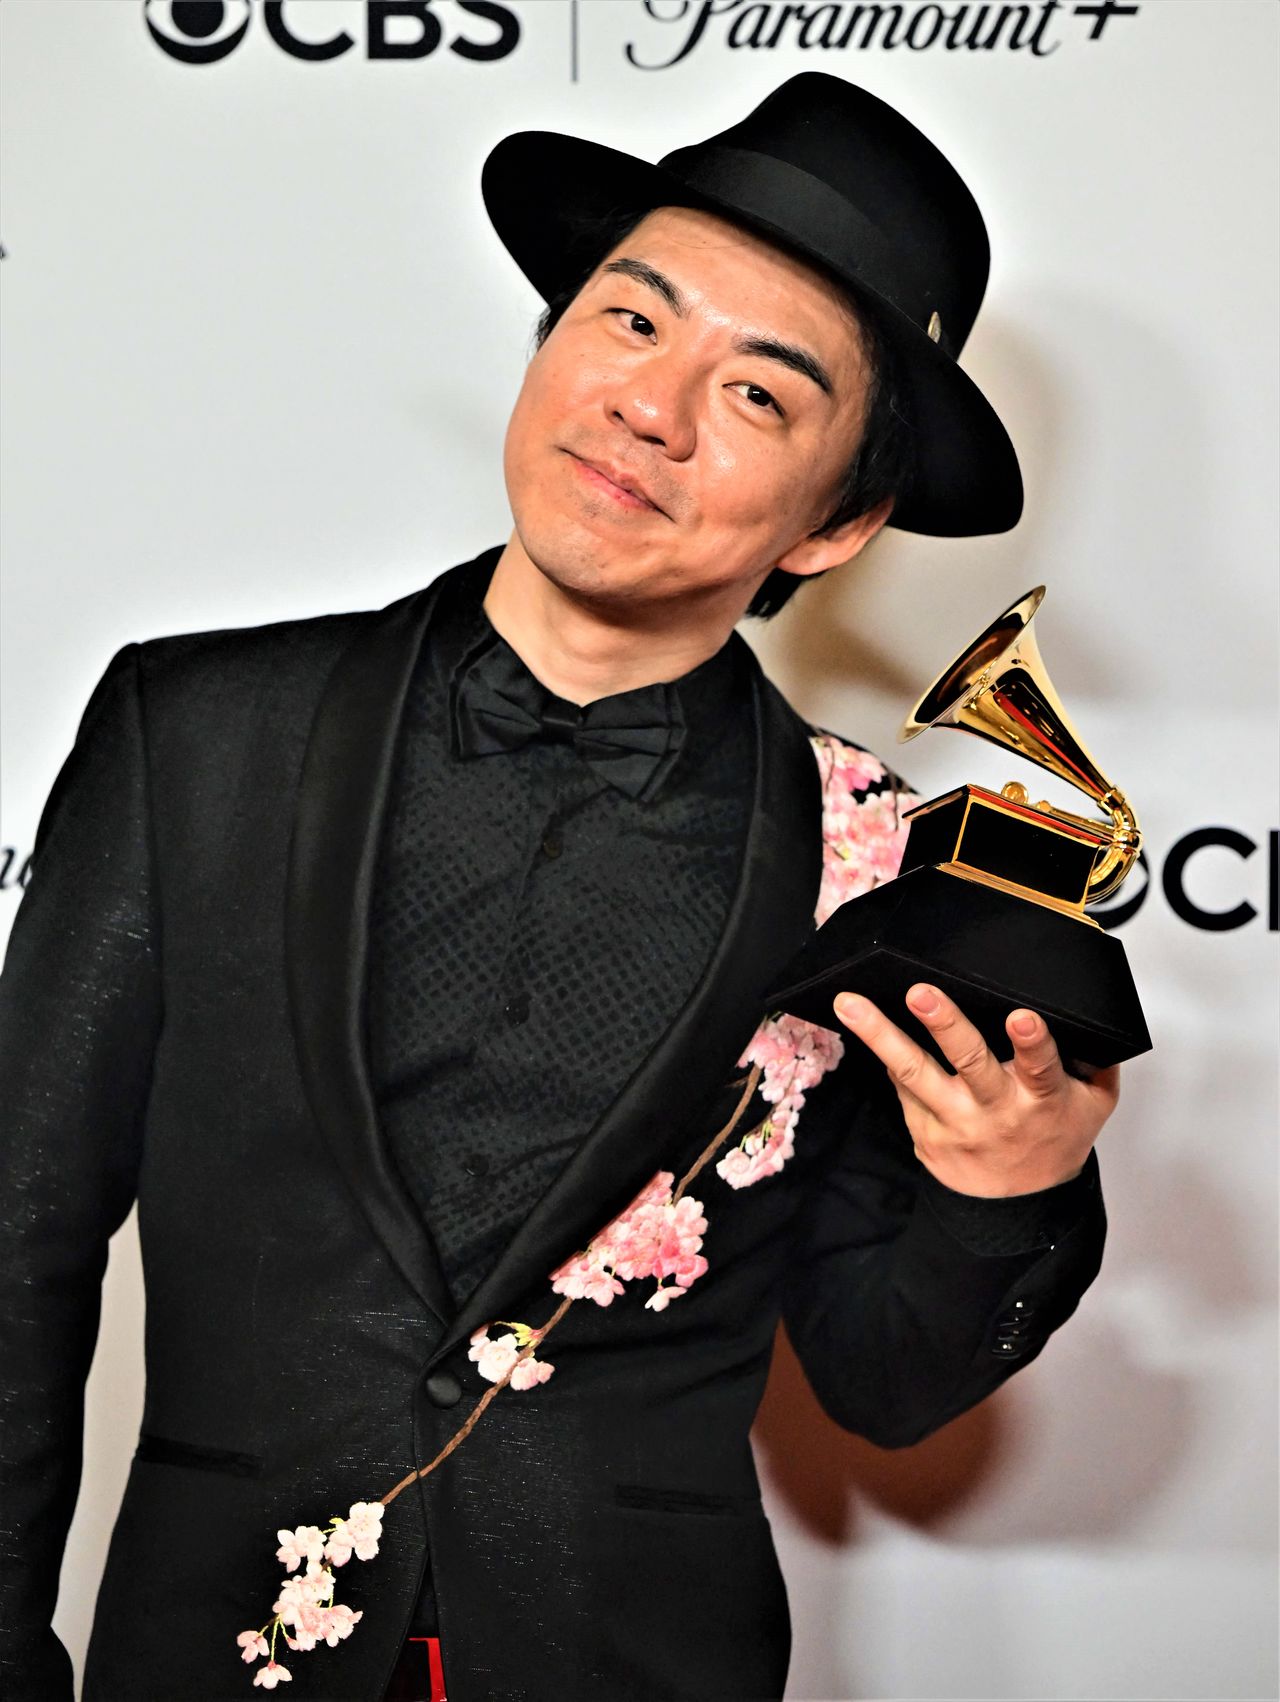 Takumi Masanori with the Grammy Award, wearing a jacket with a sakura or cherry blossom motif in Los Angeles on February 5, 2023. (© AFP/Jiji)